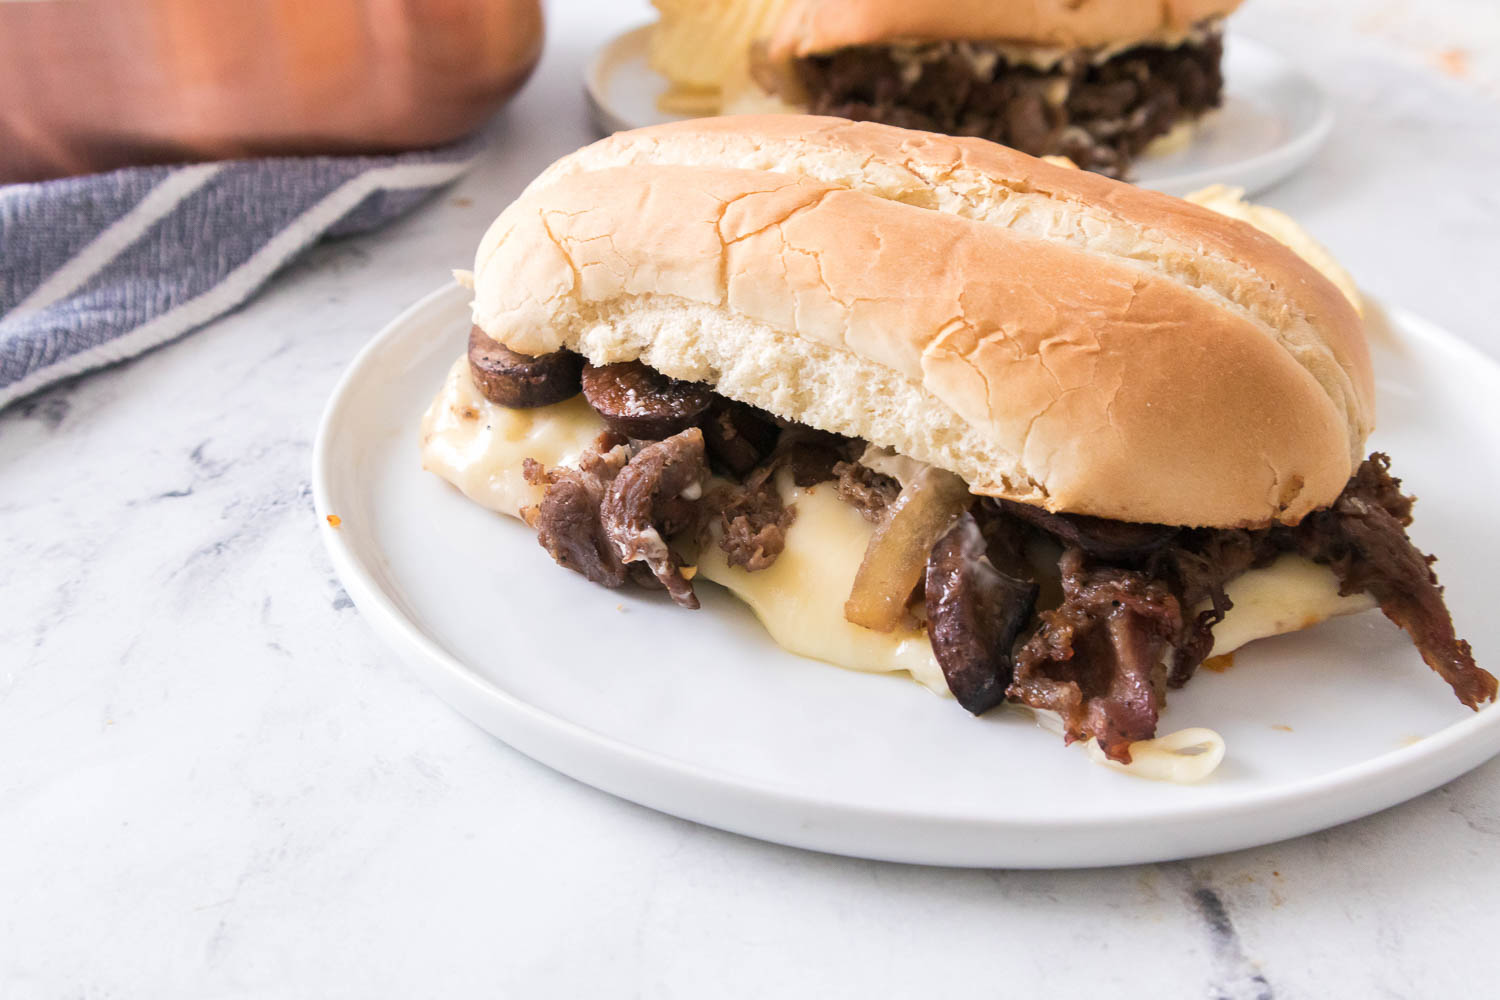 There's nothing quite like a Philly cheesesteak. Thin slices of steak, melted cheese, and onions grilled to perfection on a fresh roll- it doesn't get much better than that. And while you can find variations of this sandwich all over the country, there's really nothing quite like the real thing from Philadelphia.